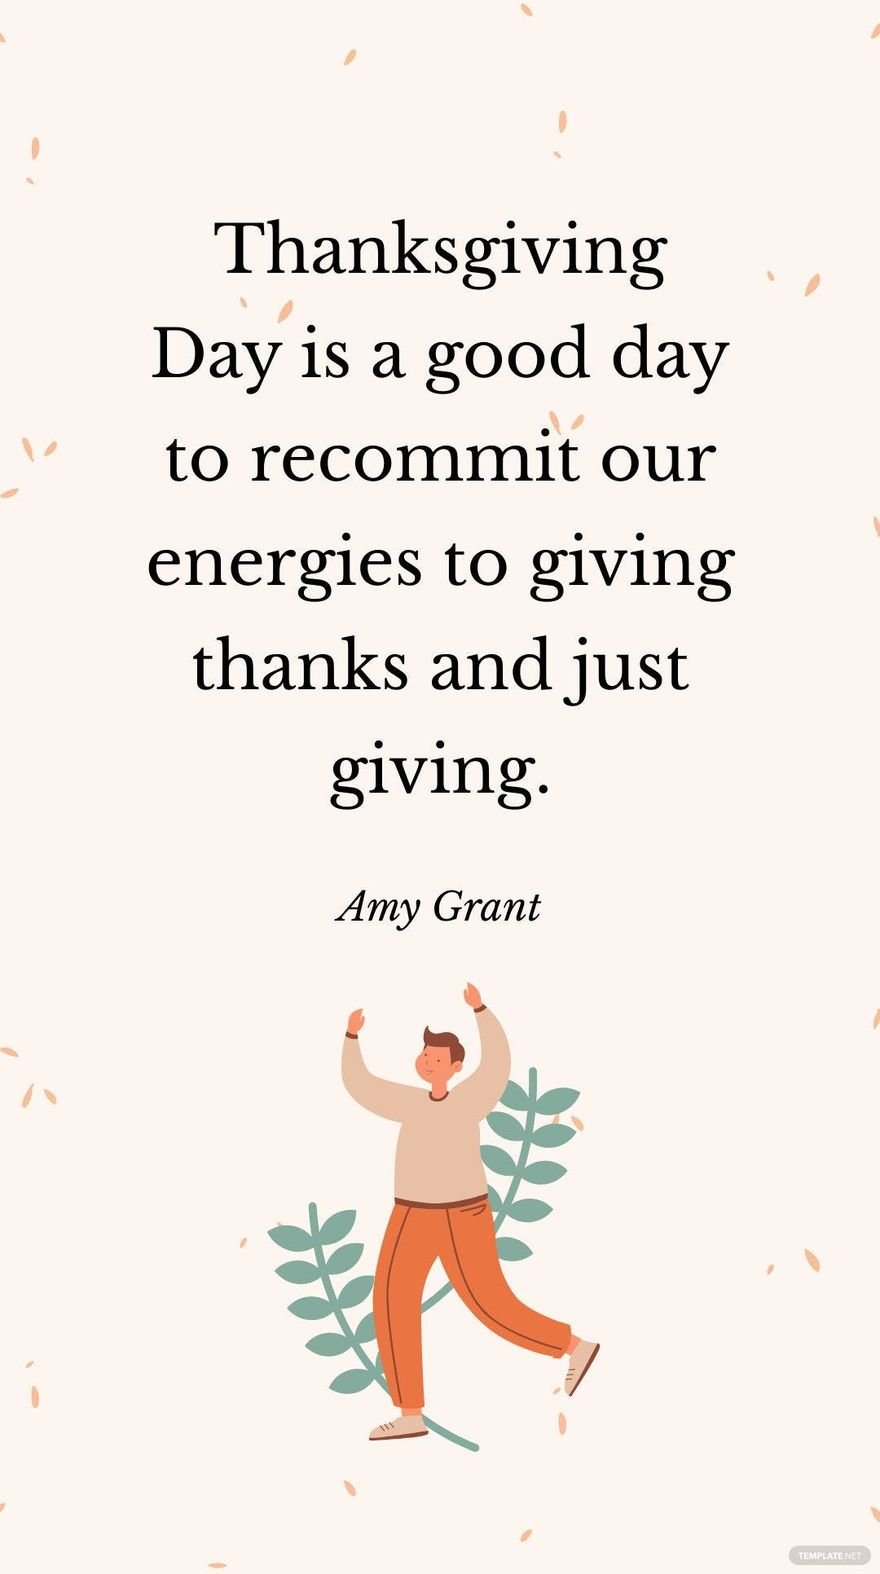 Amy Grant - Thanksgiving Day is a good day to recommit our energies to giving thanks and just giving.